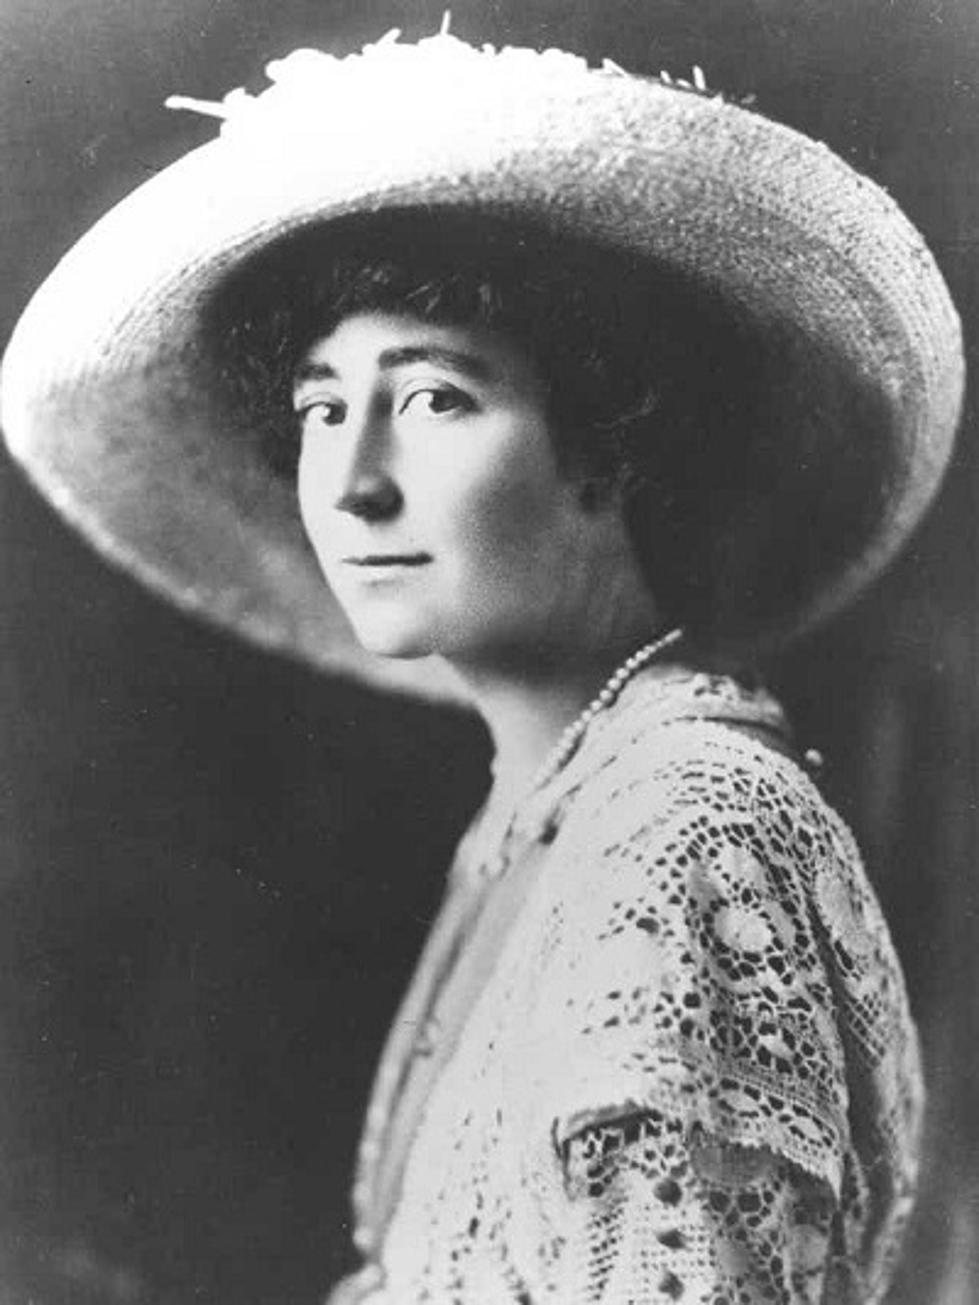 ‘Vote for Jeannette Rankin’ on the Quarter Campaign Underway